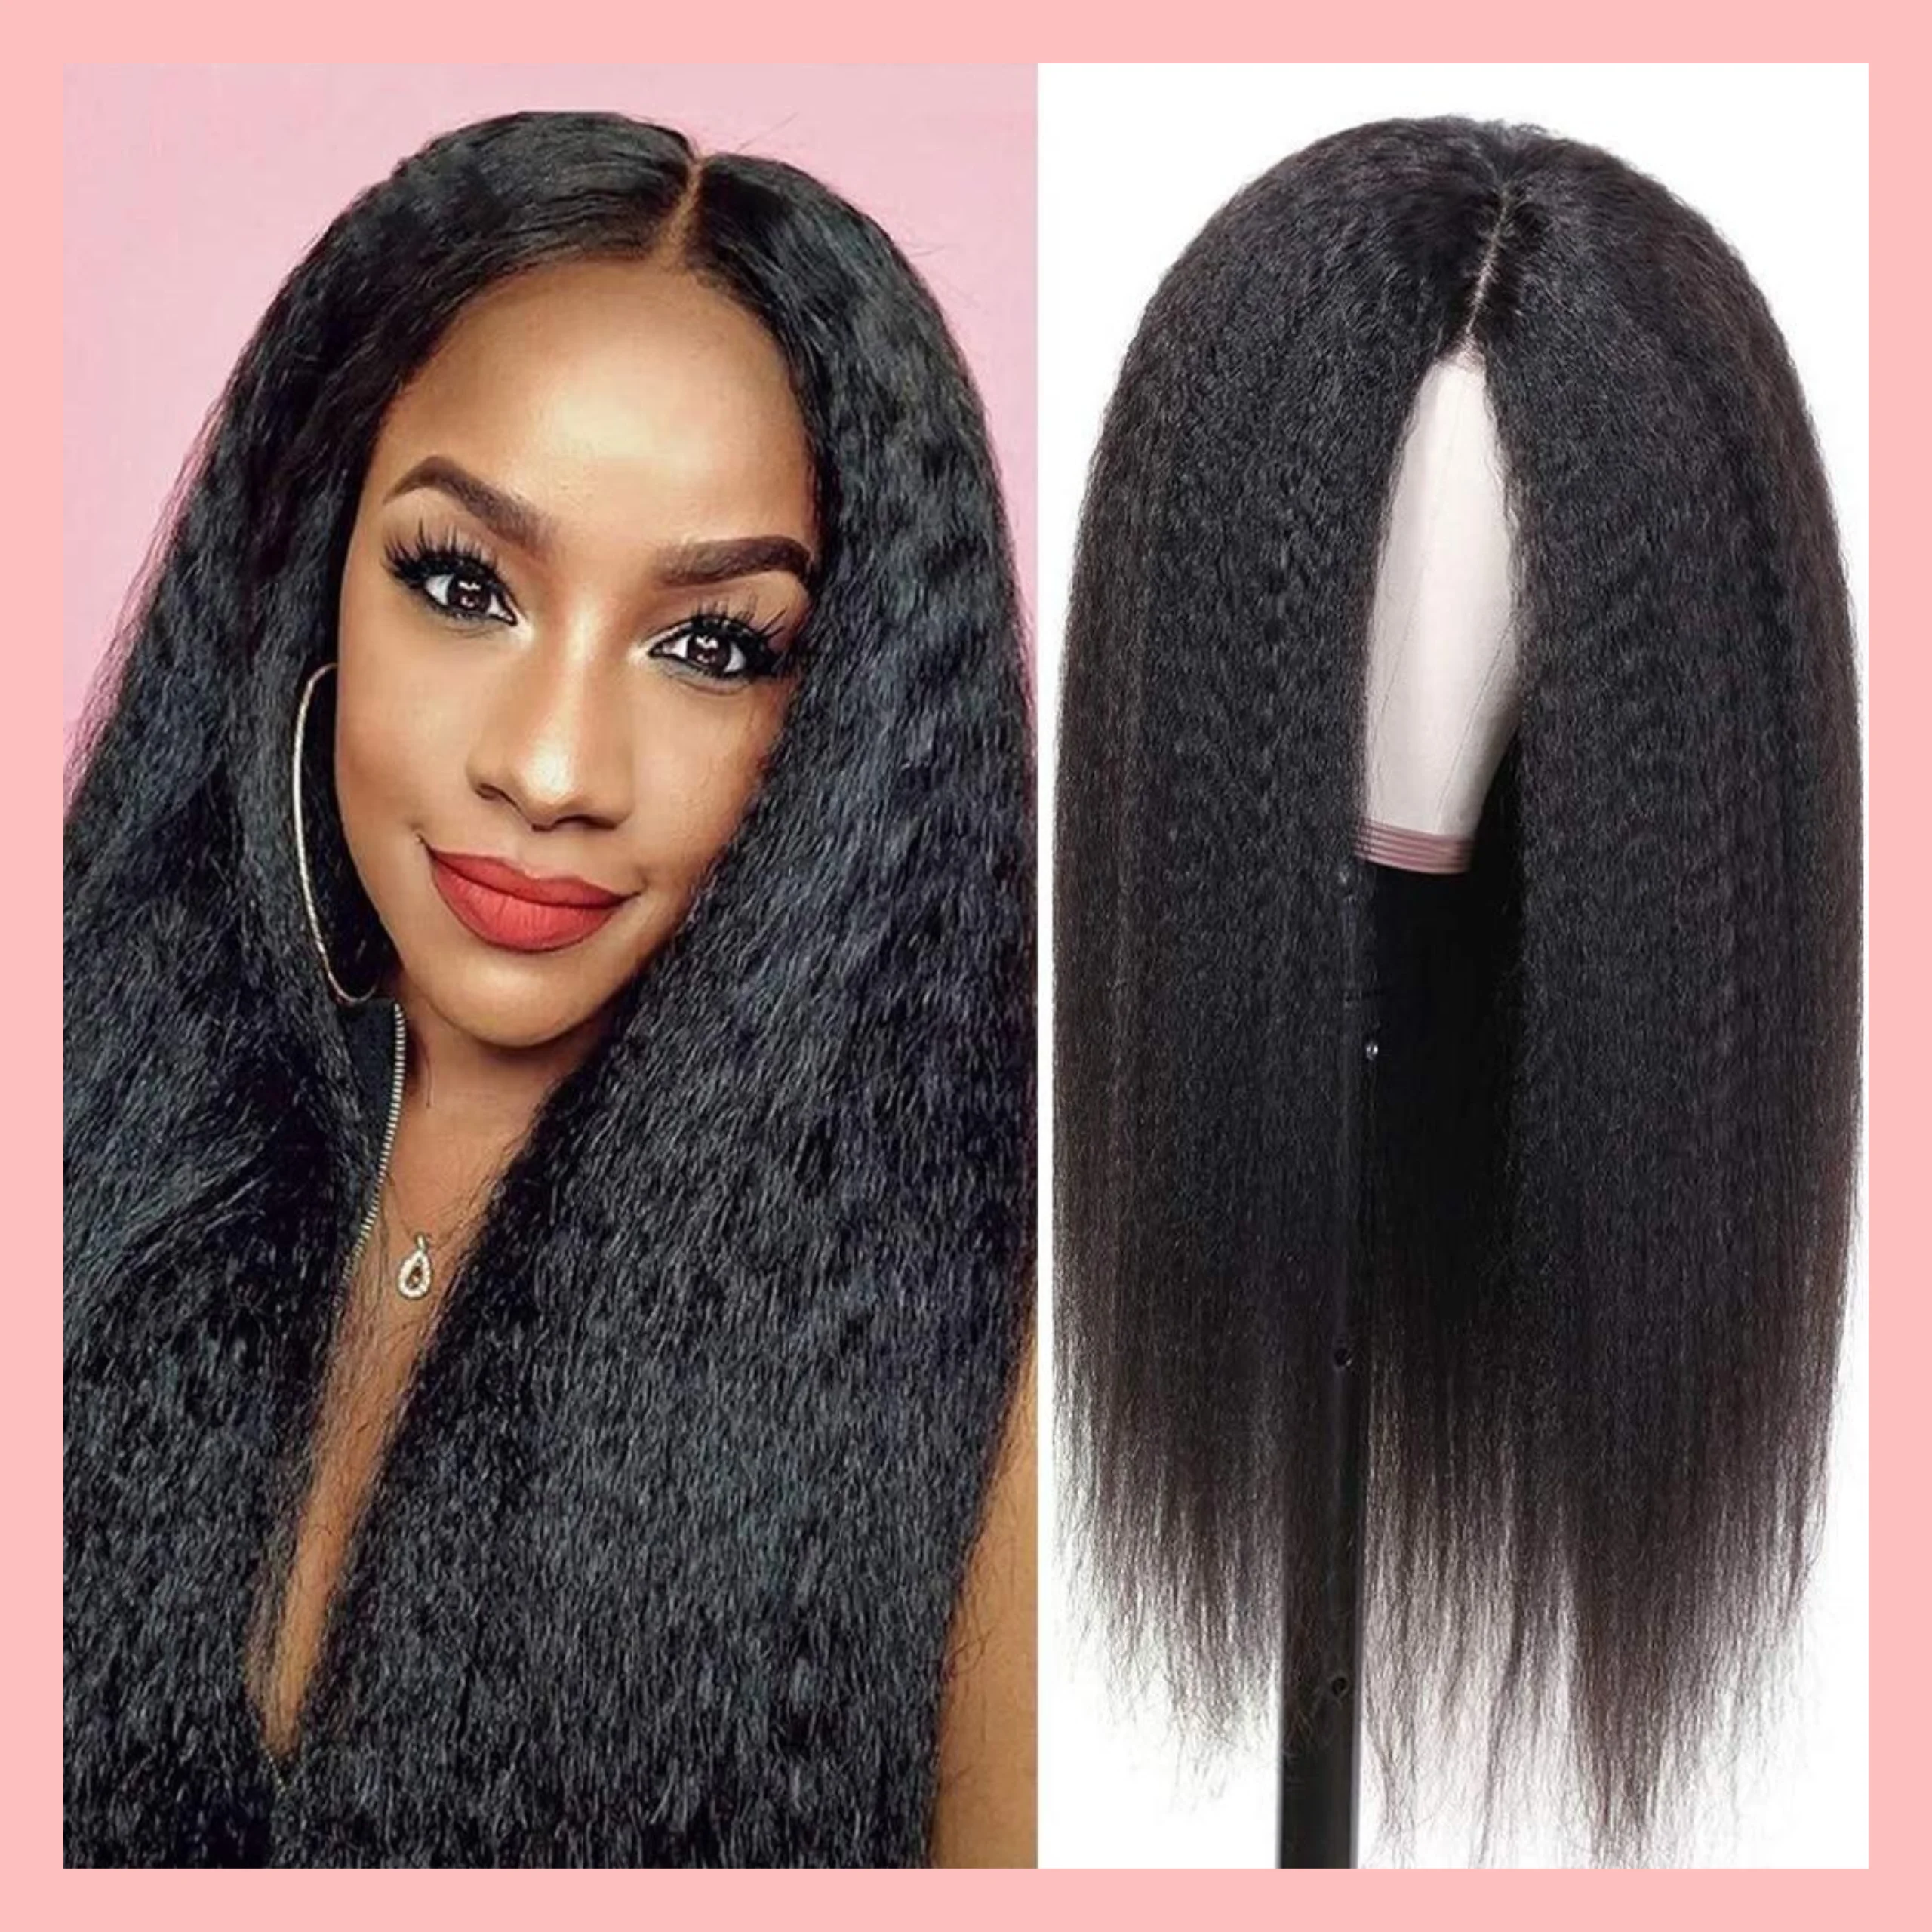 uneed-brazilian-kinky-straight-lace-front-wigs-for-black-women-13x4-lace-front-180-density-32-inch-remy-hair